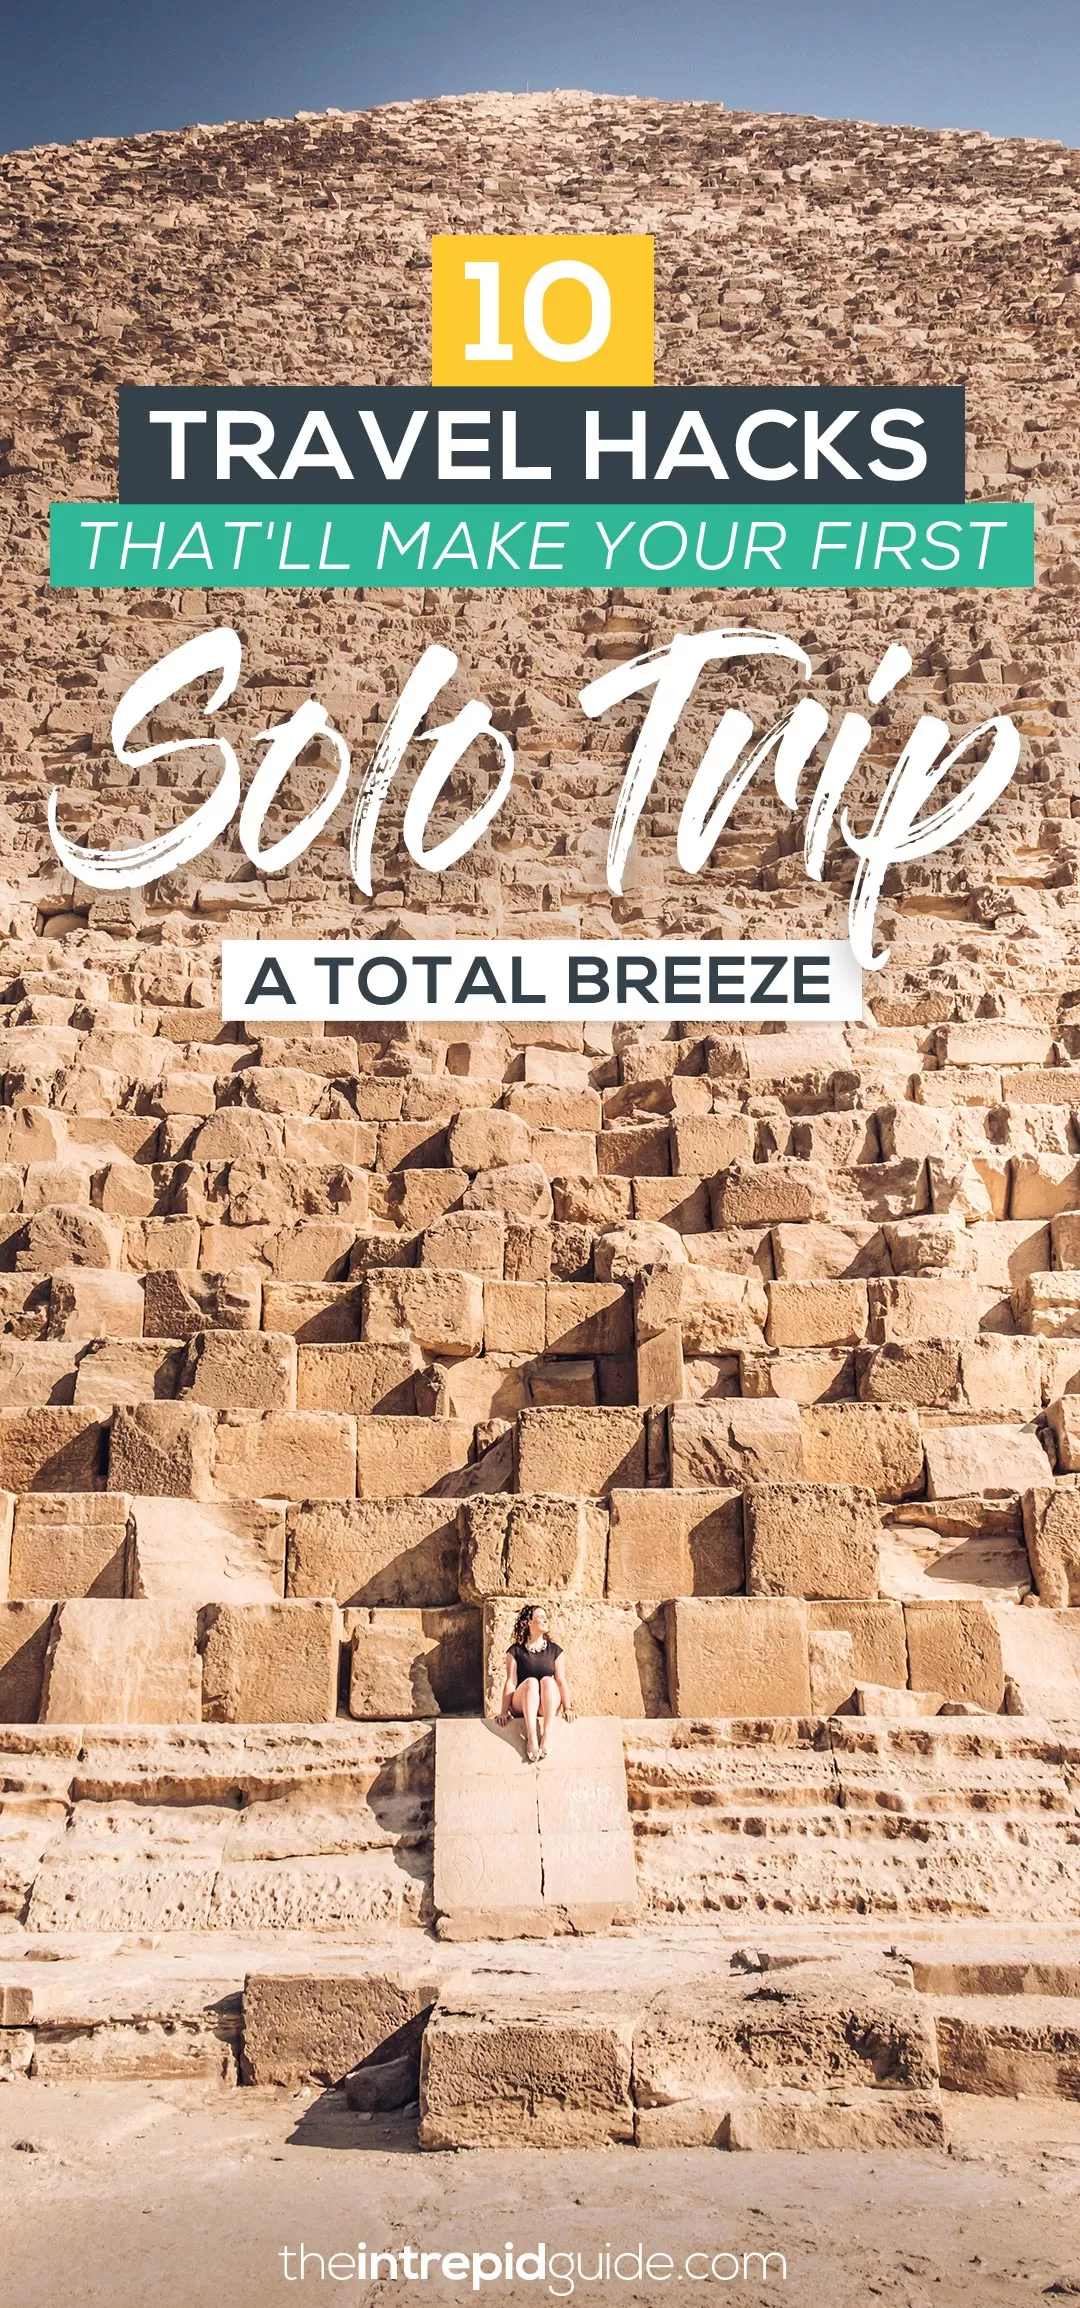 10 travel hacks for your first solo trip